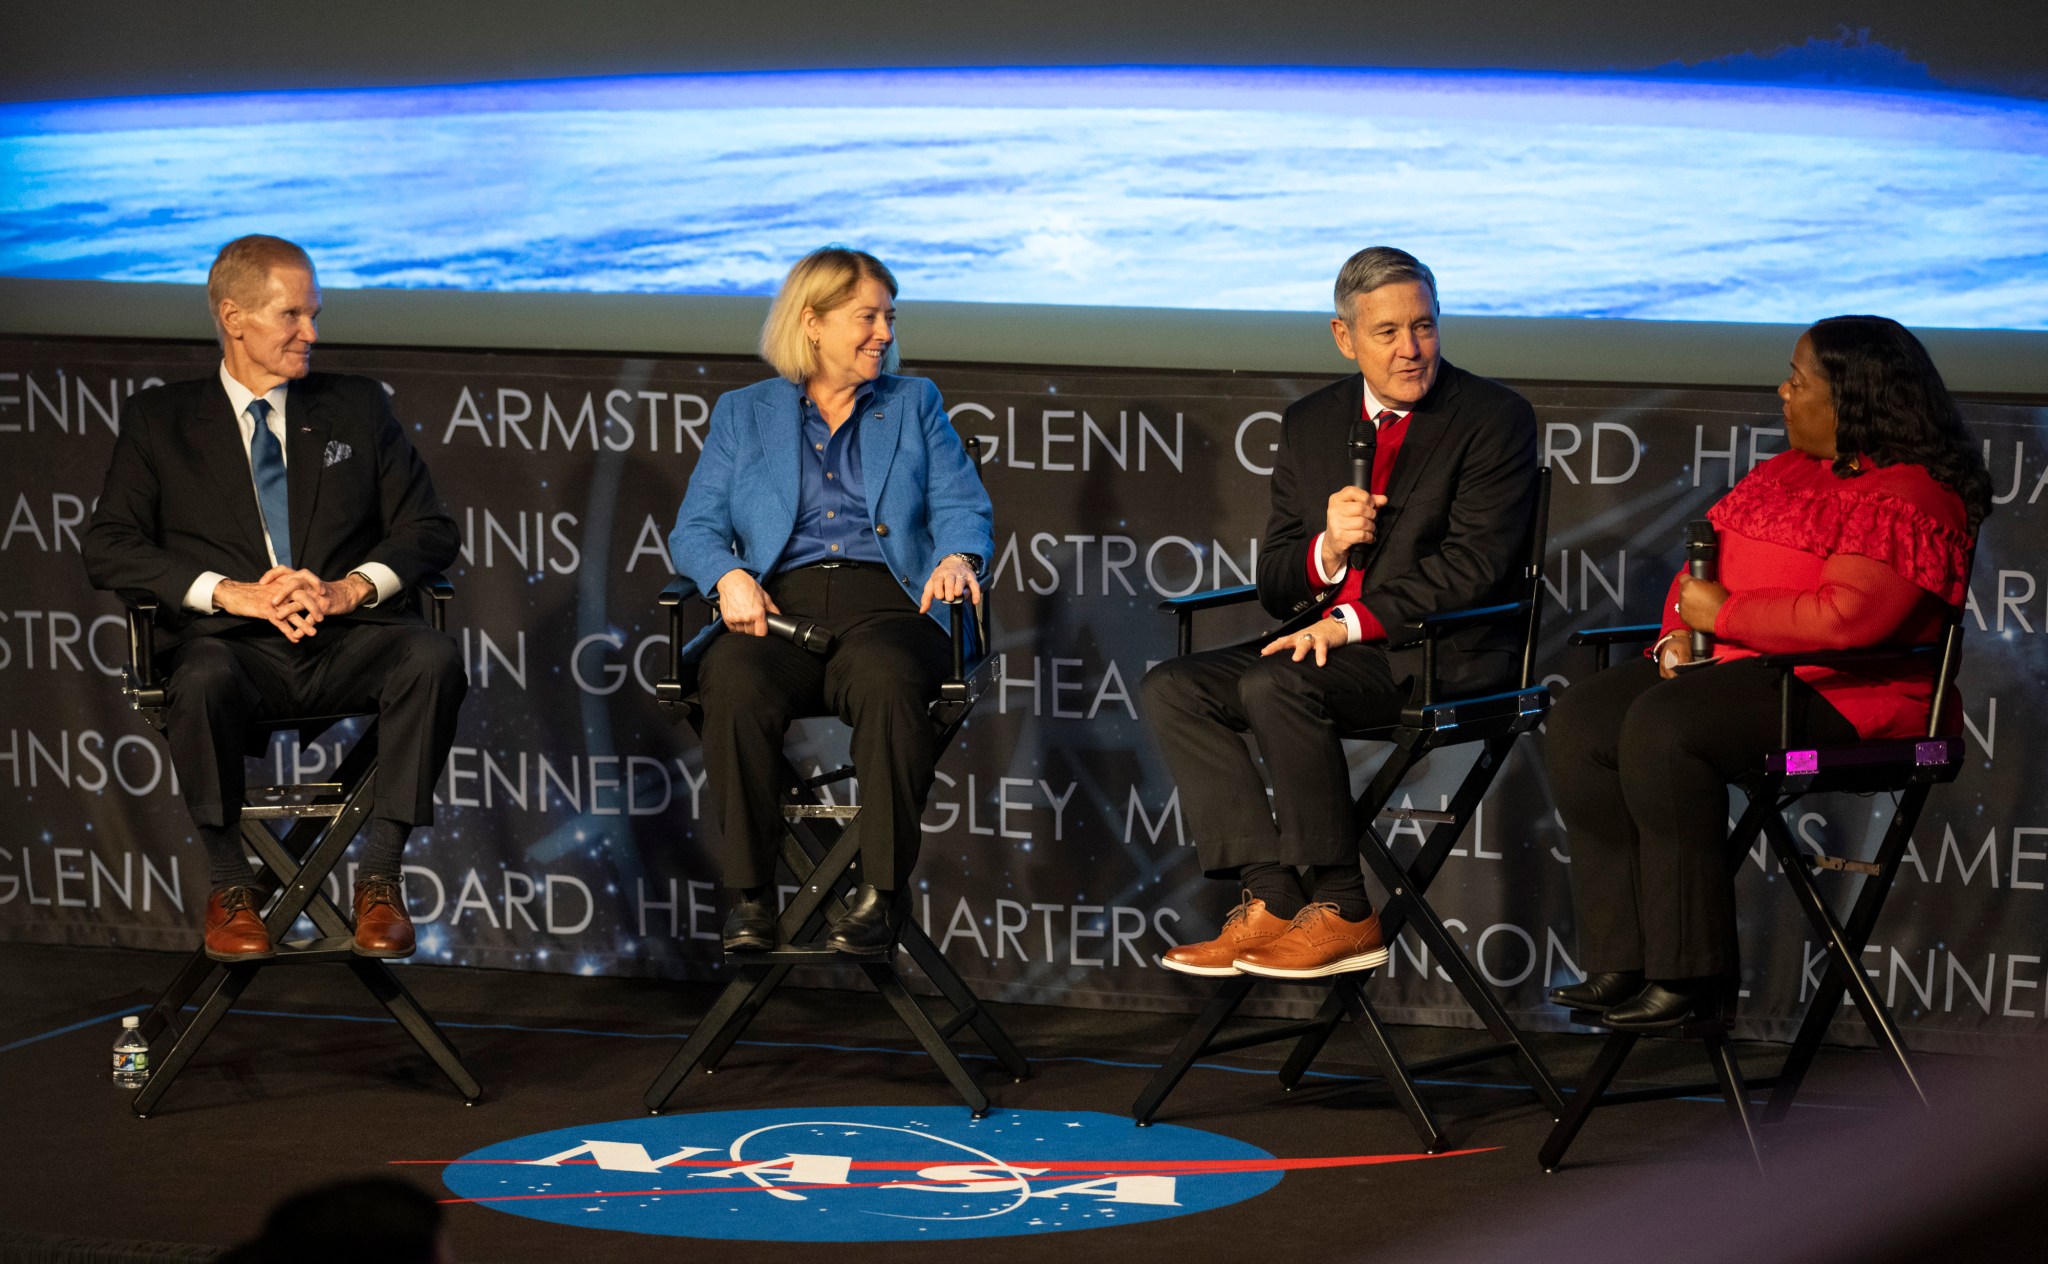 NASA Administrator Bill Nelson, left, Deputy Administrator Pam Melroy, second from left, Associate Administrator Bob Cabana, second from right, and Michelle Jones of Communications, right, on stage at all hands at NASA Headquarters in Washington.